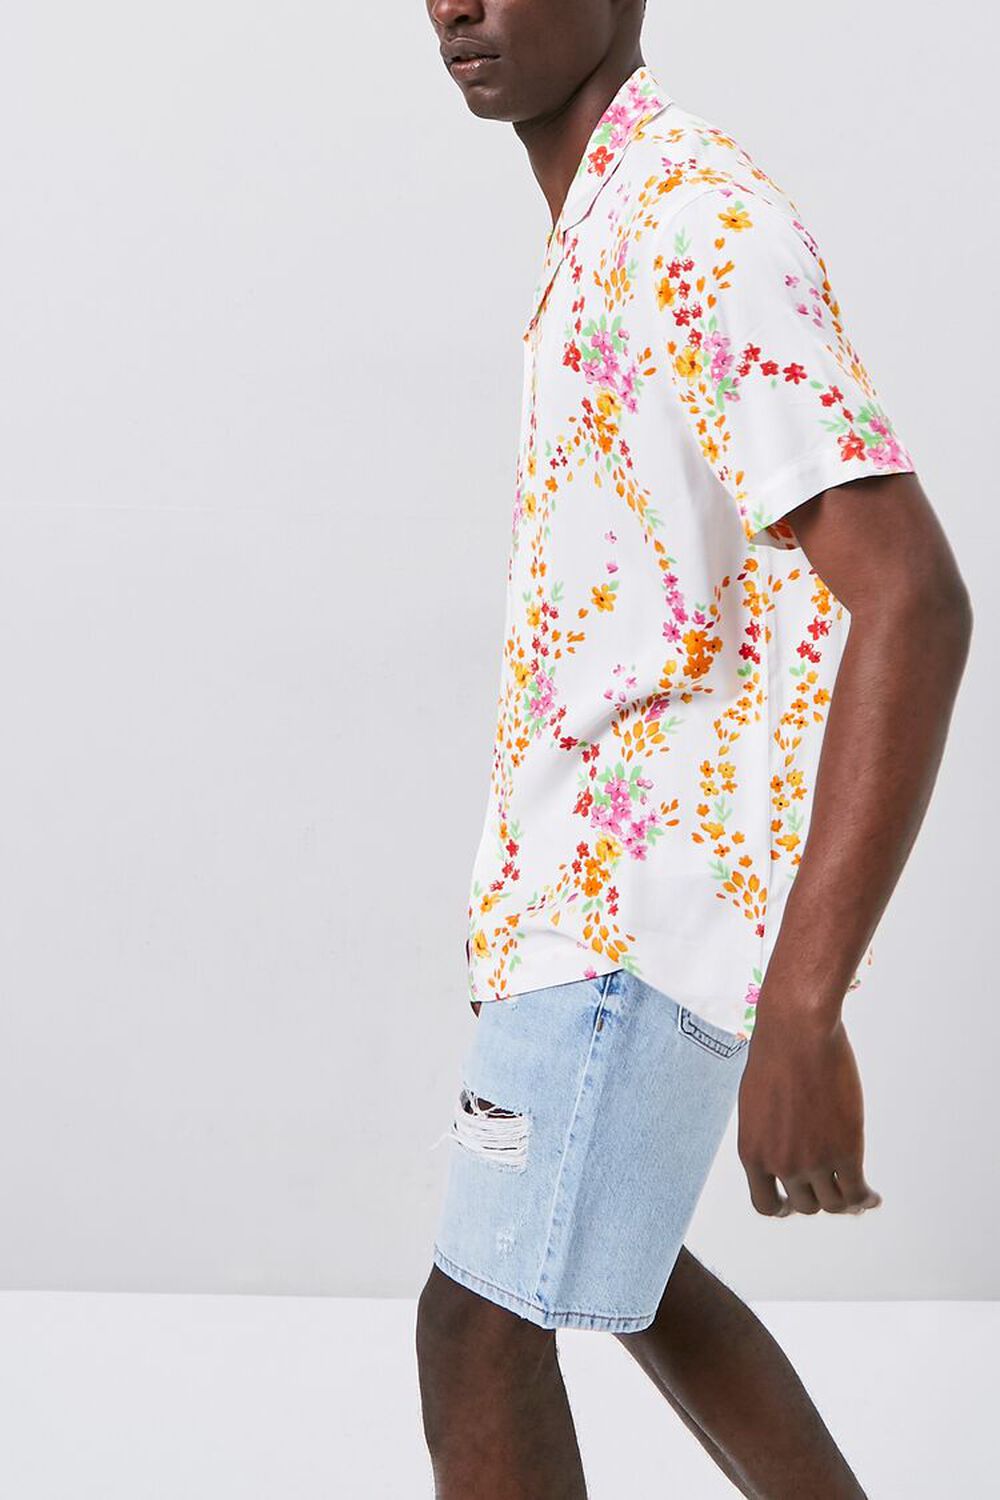 WHITE/MULTI Floral Print Fitted Shirt, image 2